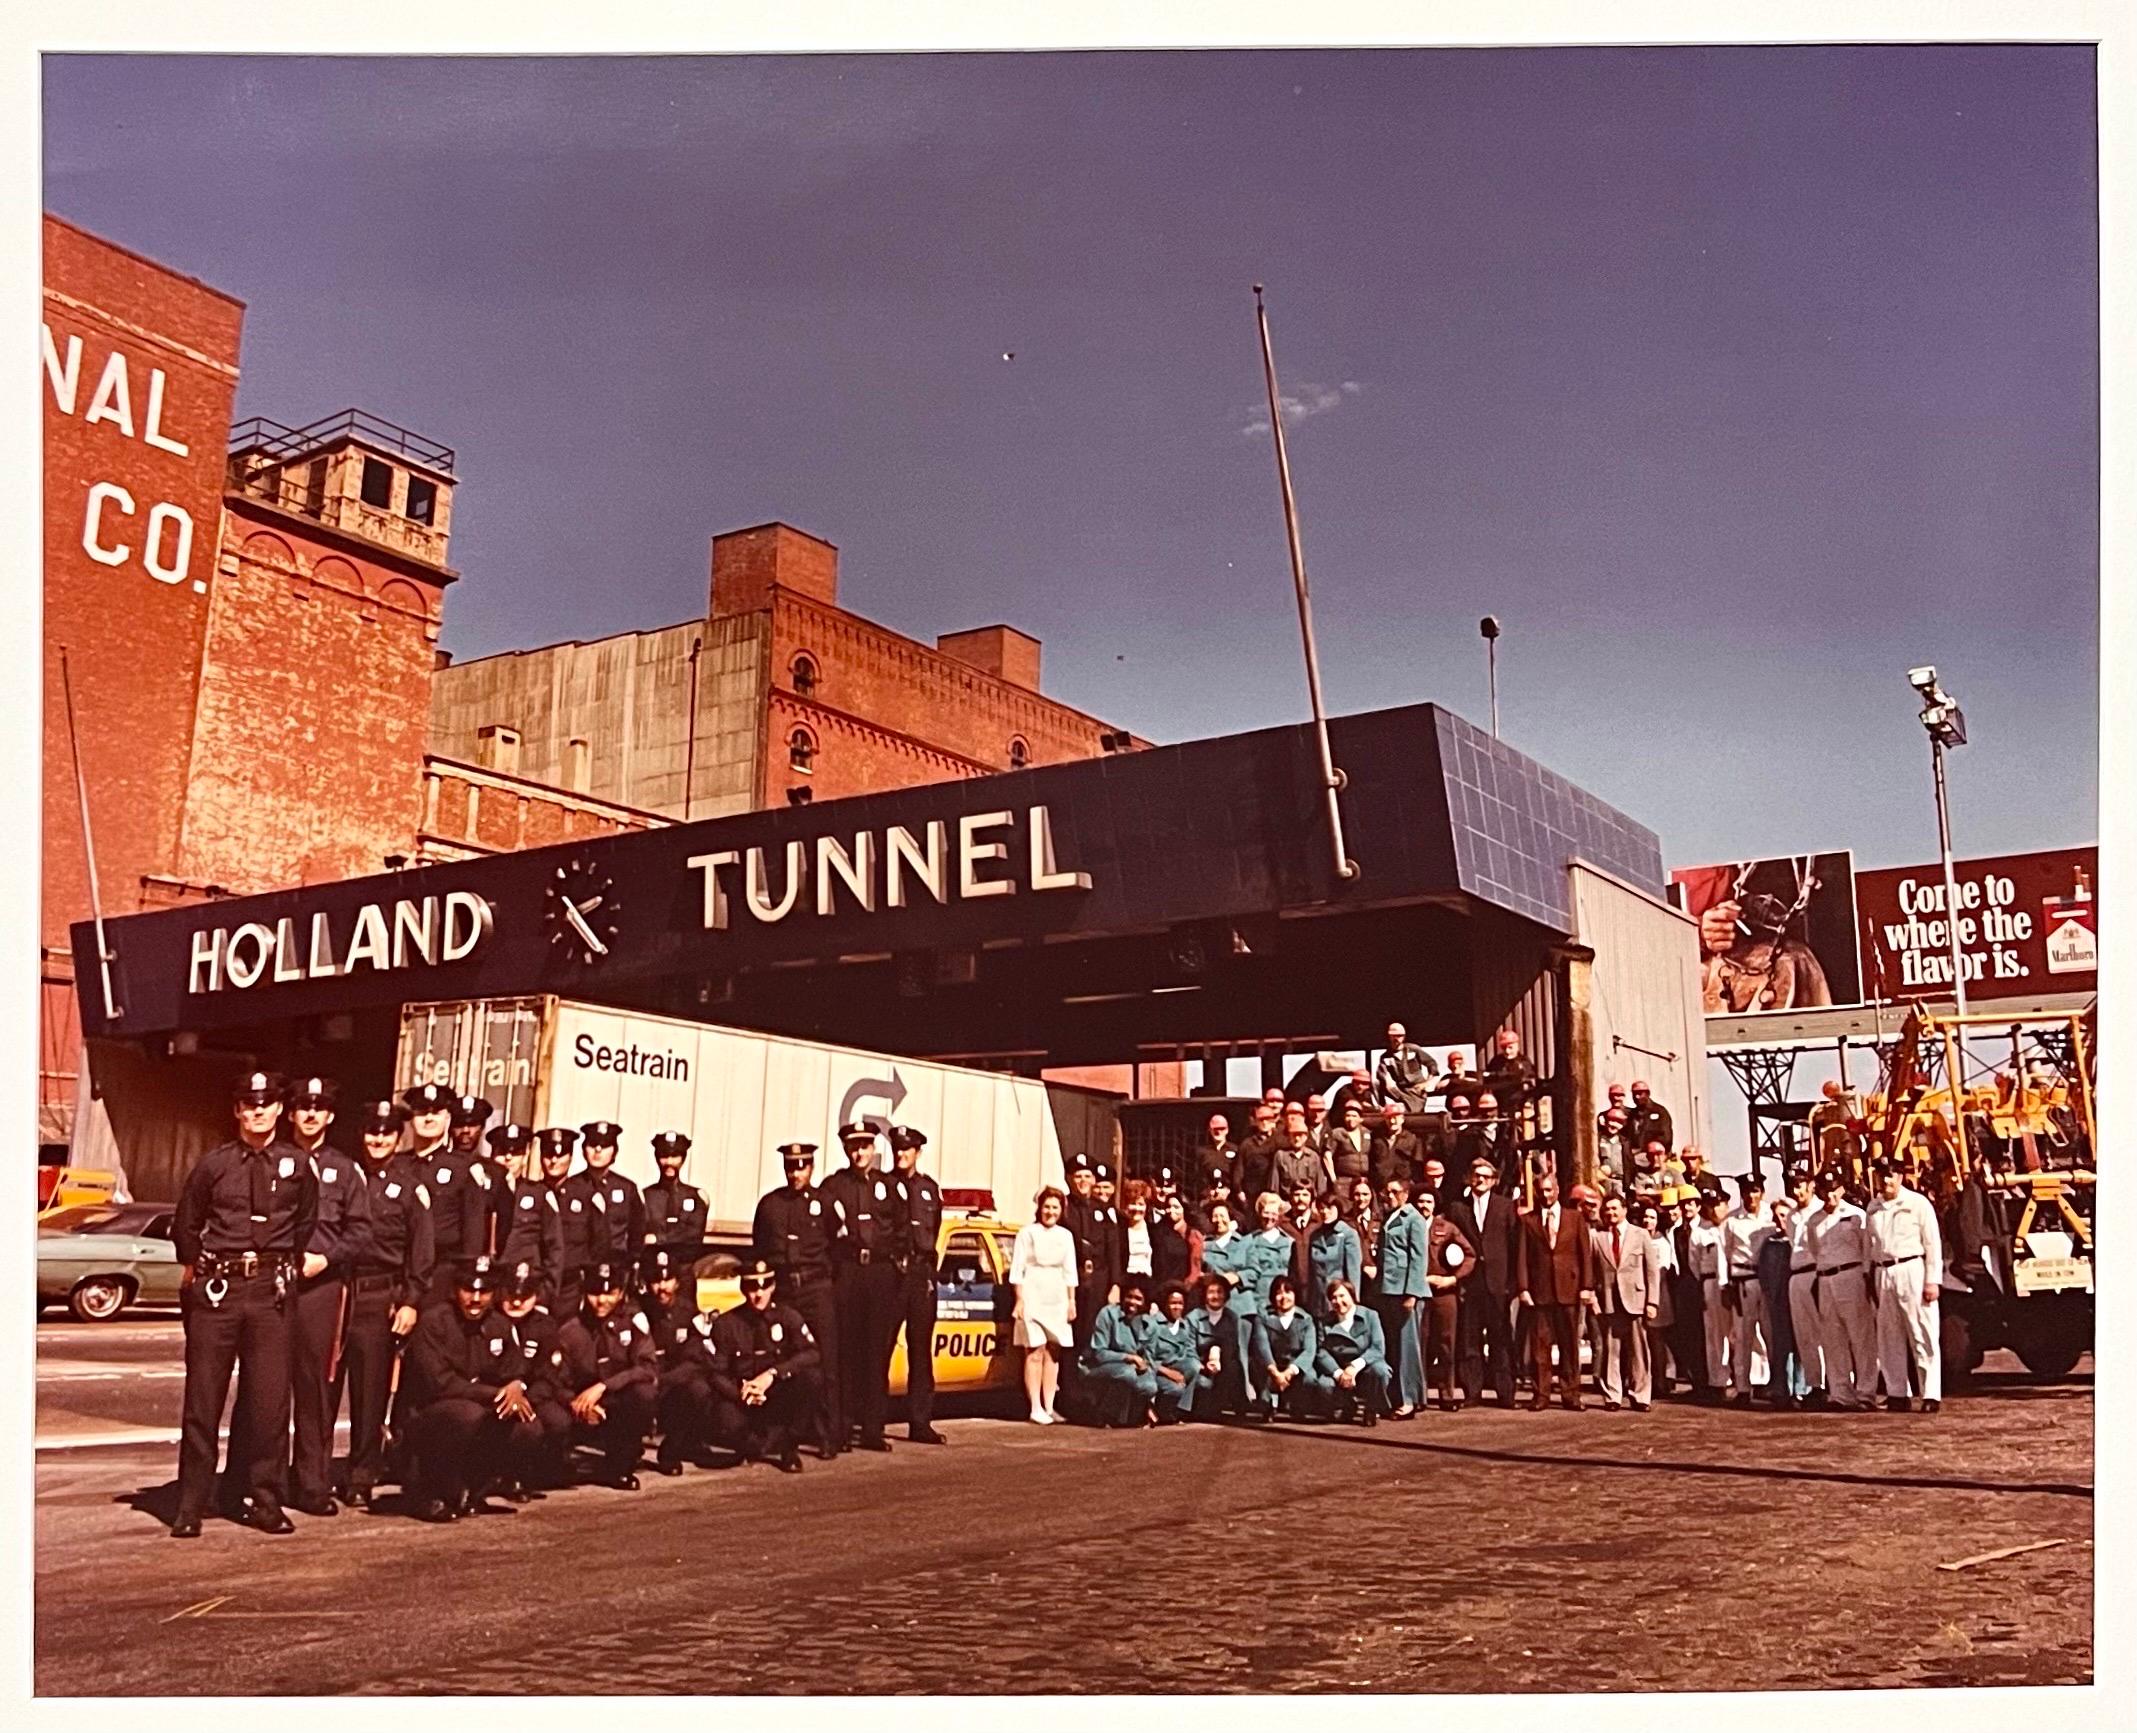 Neal Slavin (American, b. 1941)
Holland Tunnel Crew, New York, NY
Vintage C-print [Chromogenic development print; Ektacolor prints]
Hand signed and numbered by the photographer 48/75
Photos made with 2.25 X 2.25 Hasselblad camera and 4 X 5 Calumet